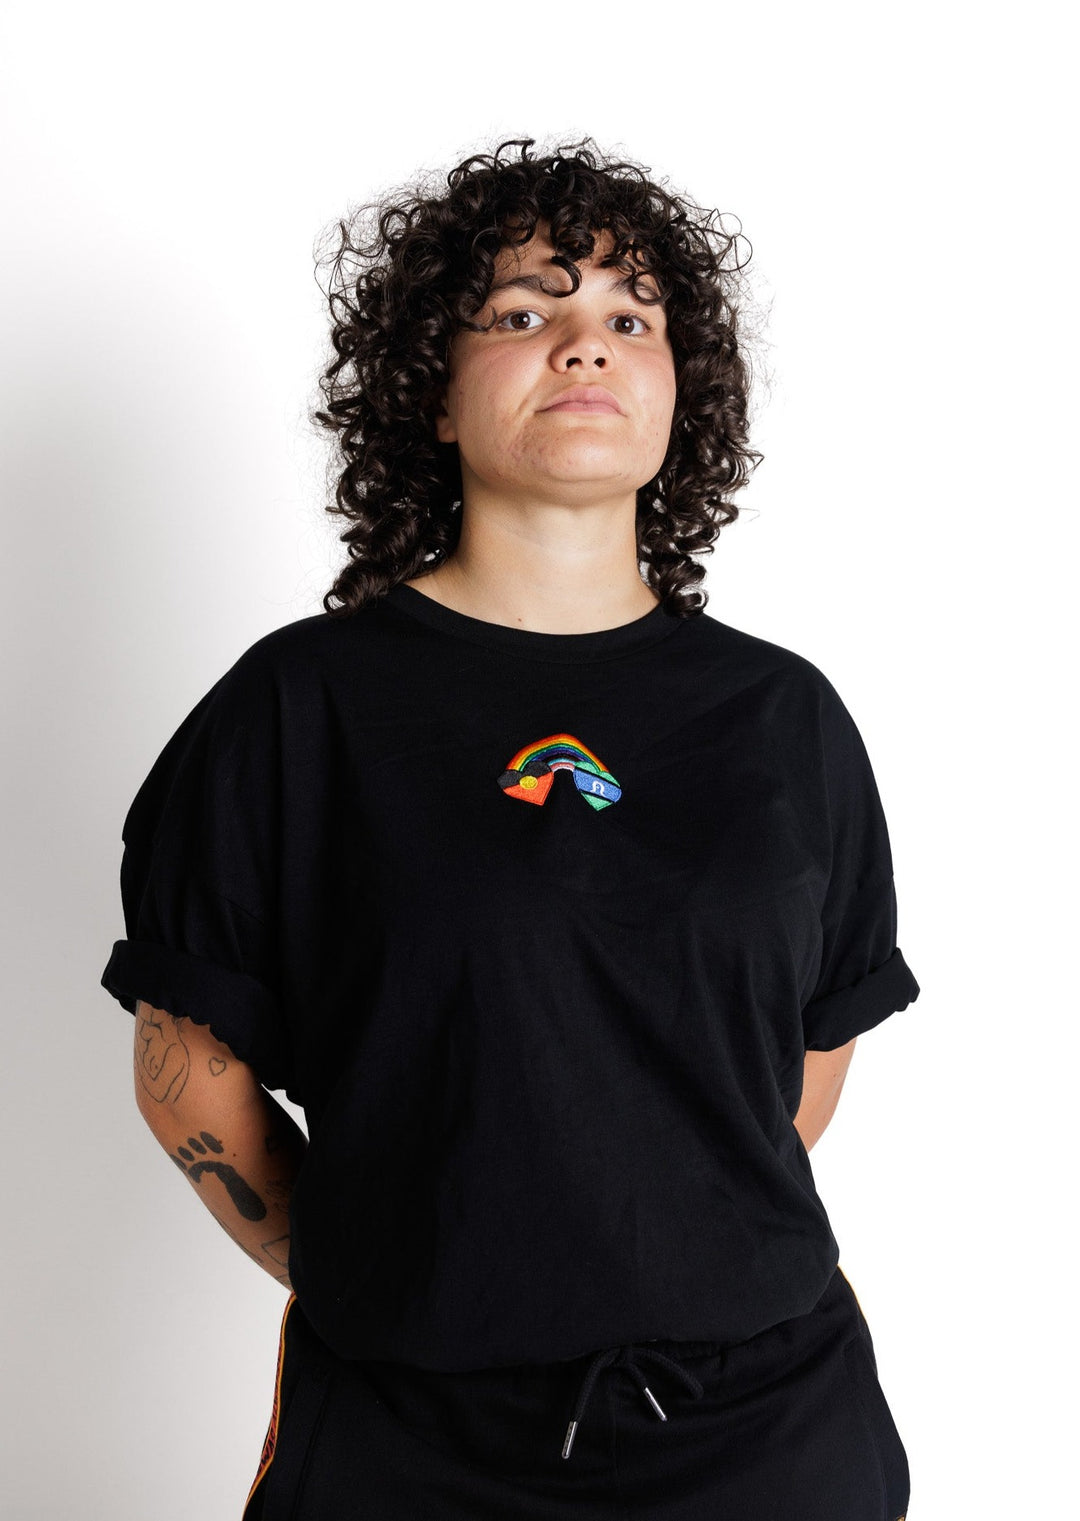 Clothing The Gaps. Blak Rainbow Luv Crop. All black boxy crop tee with  a heart featuring the Aboriginal flag at the start of a rainbow and at the end of the rainbow the Torres Strait Islander flag. This design is embroidered on the front of the t-shirt. The rainbow includes the colours from the progress pride flag. Show your pride or support for First Nations LGBTQIAS&B+ Community.